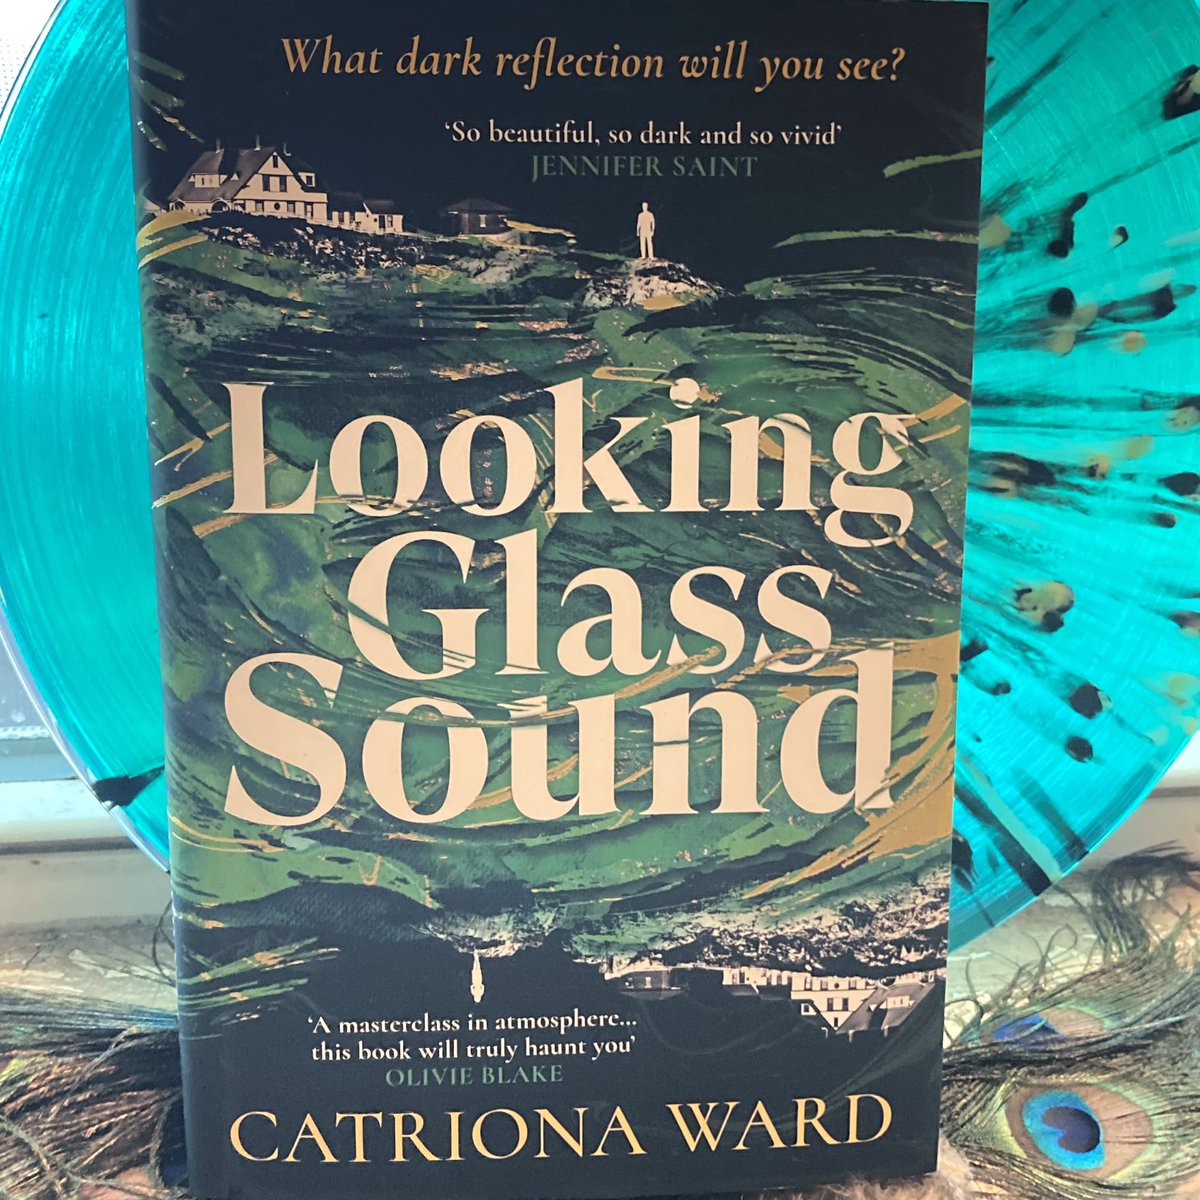 Dropped everything when #LookingGlassSound by @Catrionaward arrived yesterday and I must finish it today.